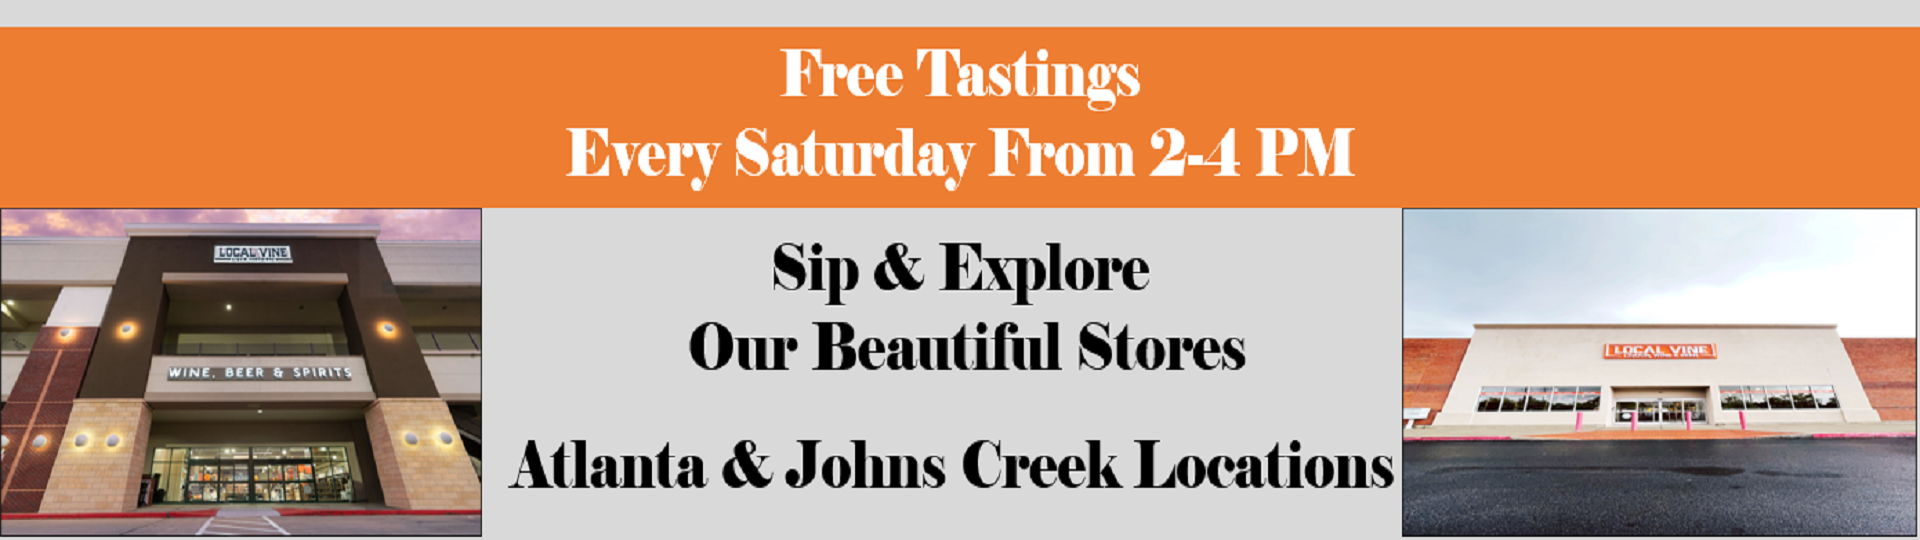 Free tastings every Saturday from 2-4 PM